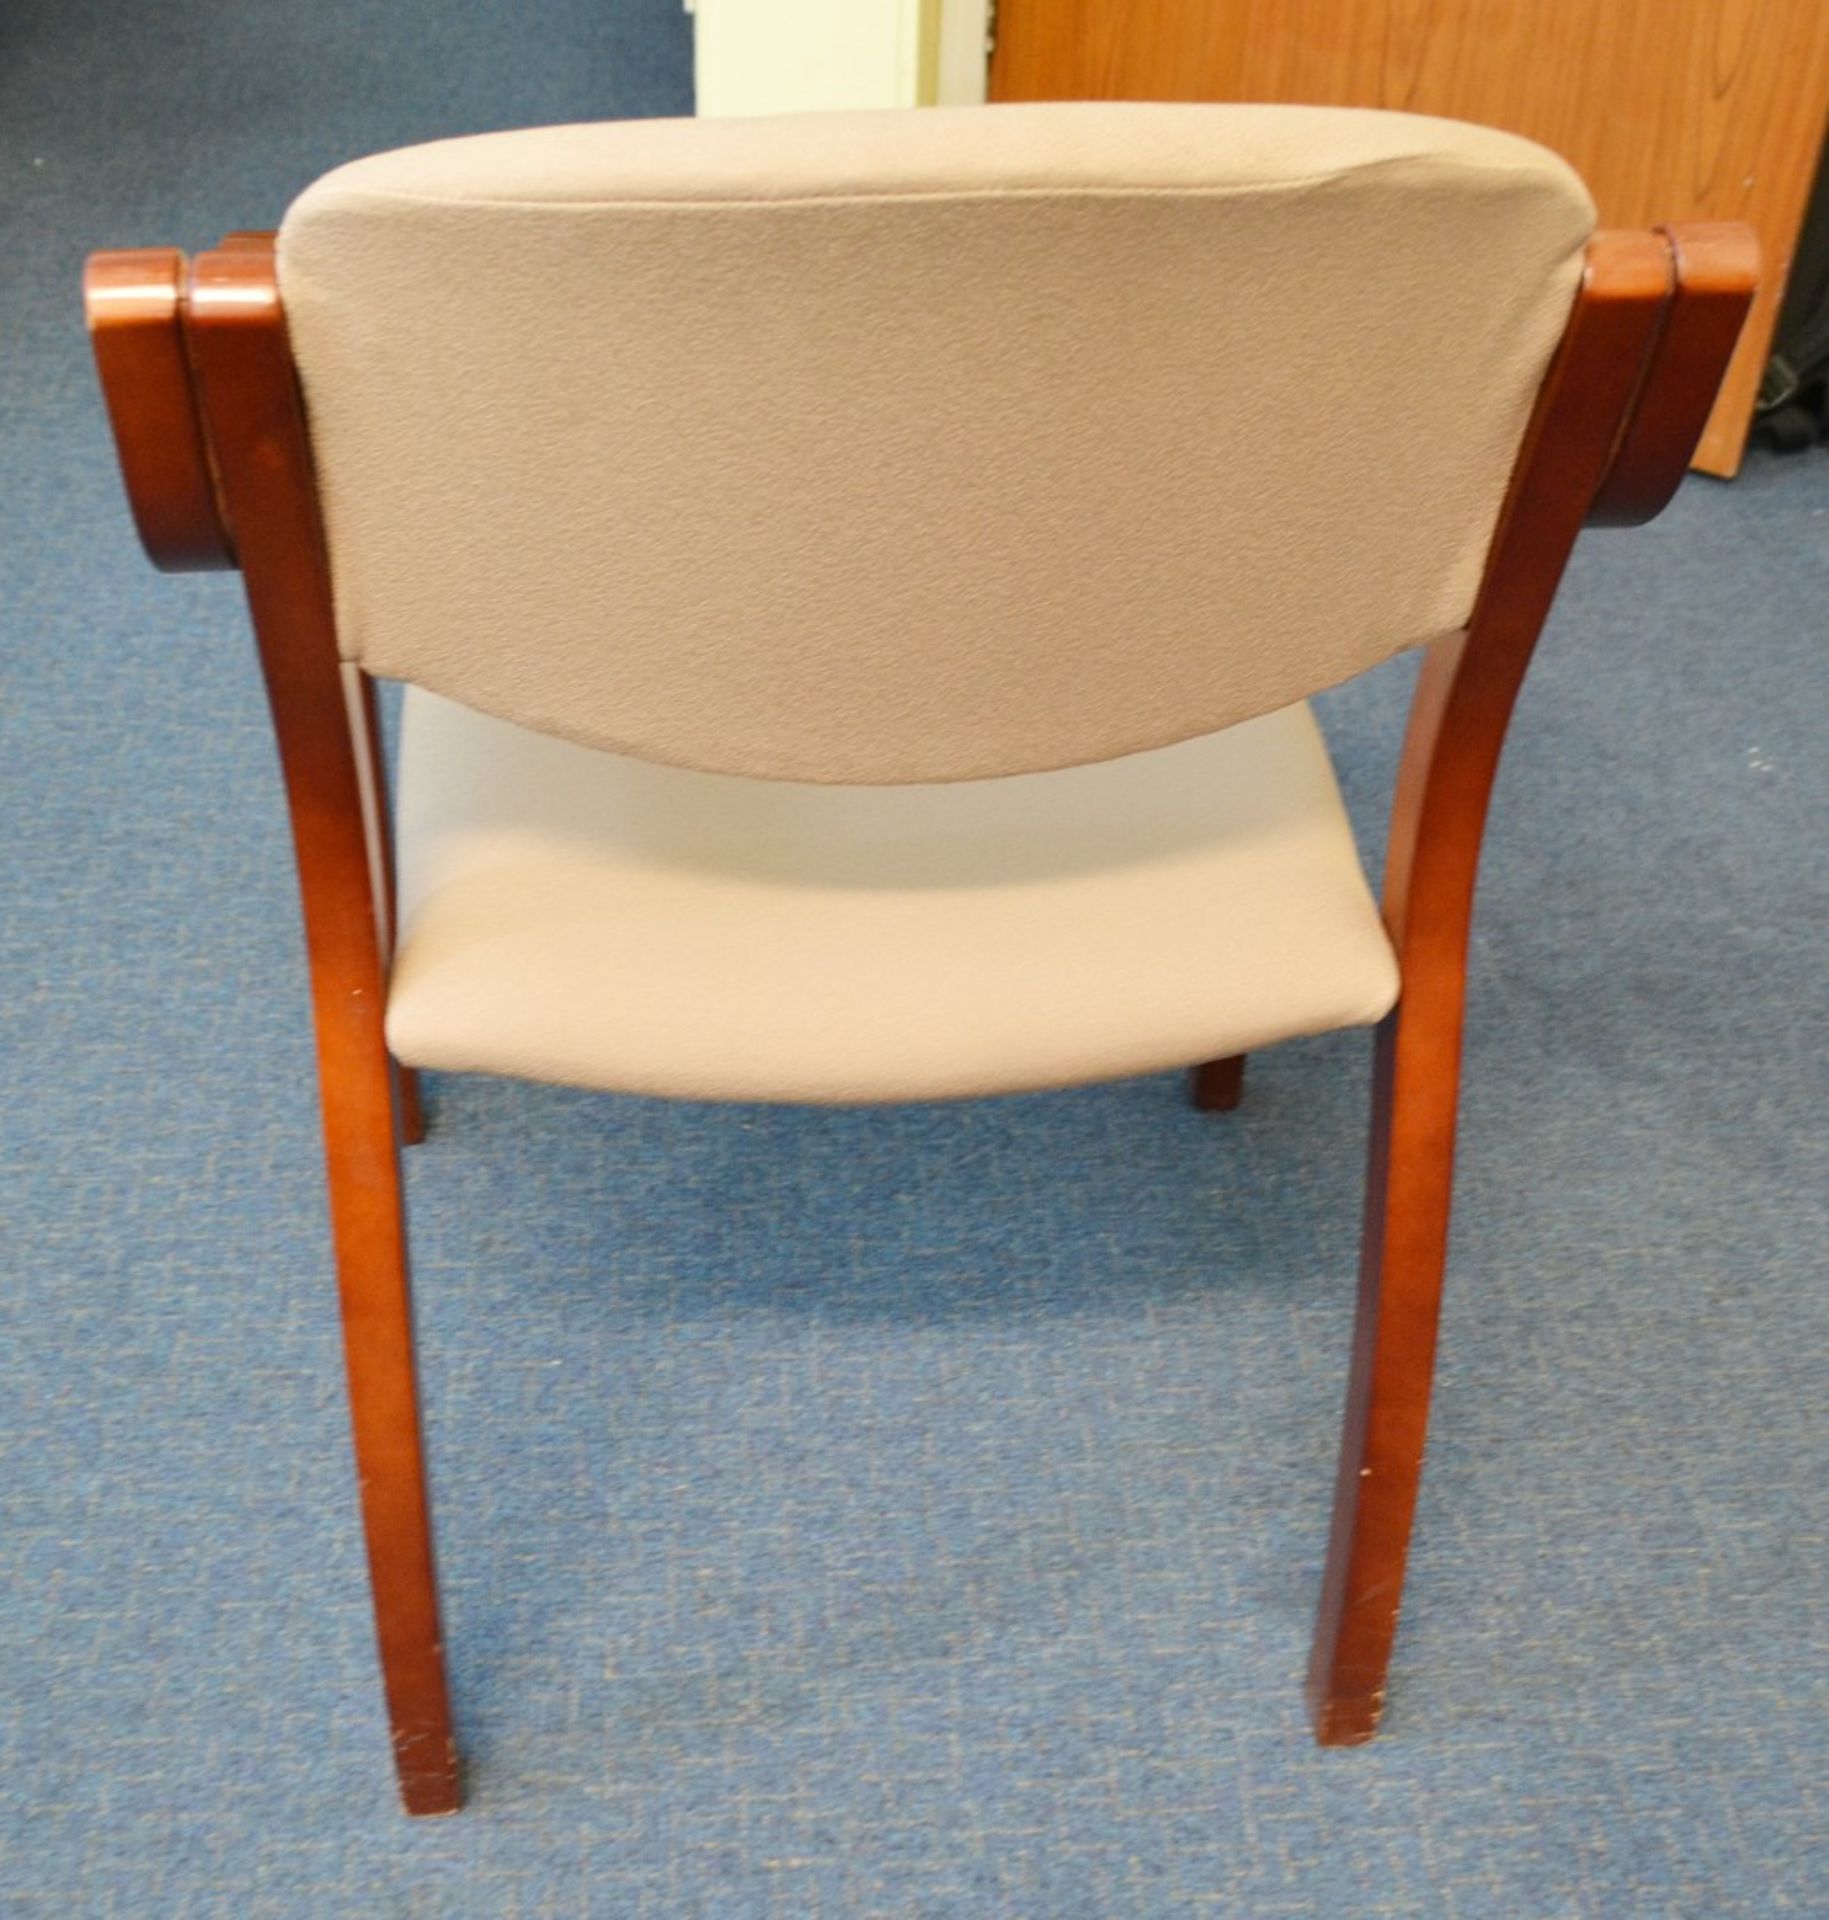 4 x Beige Office Boardroom Chairs - Ref: VM554 - CL409 - Location: Wakefield WF16 - Image 4 of 5